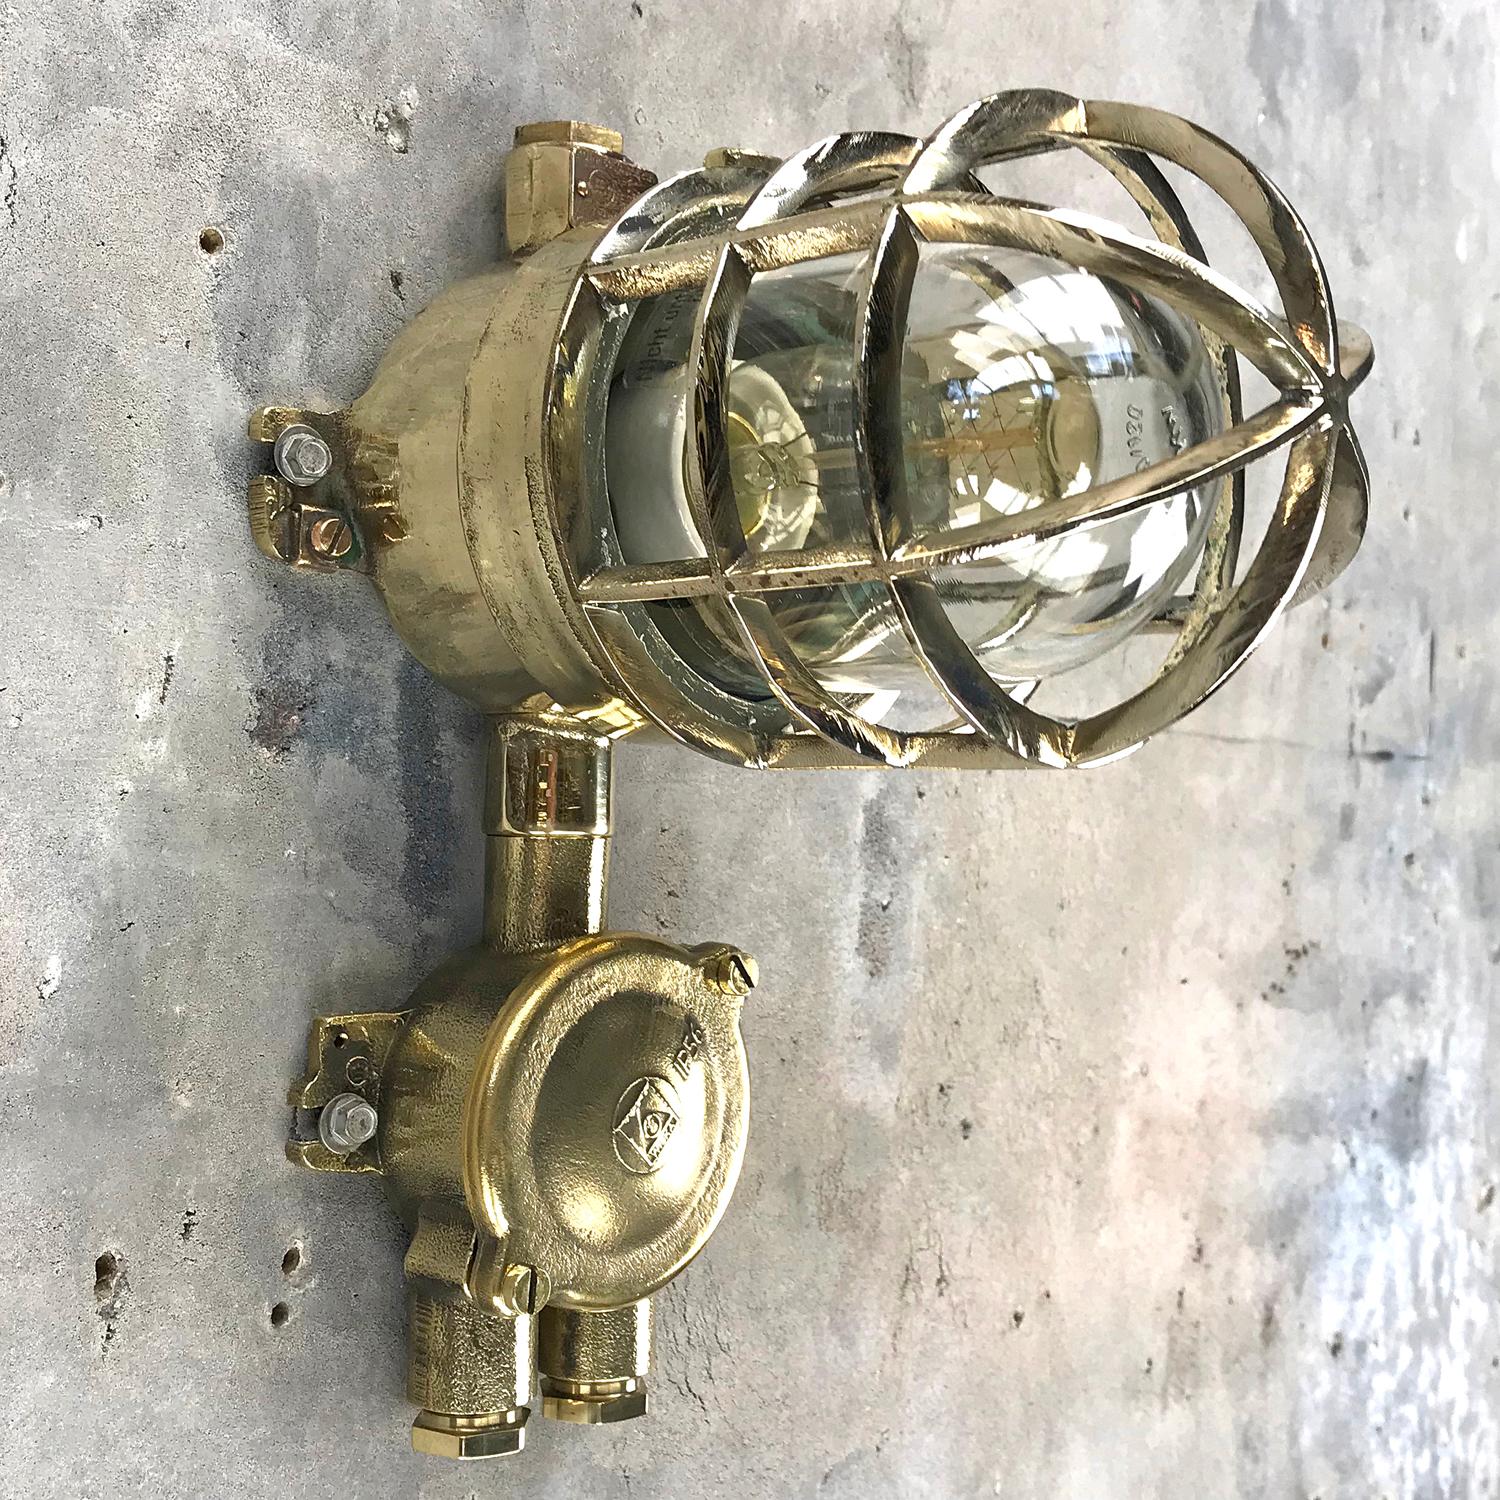 Solid cast bronze and brass explosion proof pendant manufactured, circa 1975 made by Wiska and Centurion who are manufacturers of Ex. (explosion proof) rated fixtures, the lamp comes fitted with a cast brass Wiska junction box for ease of electrical